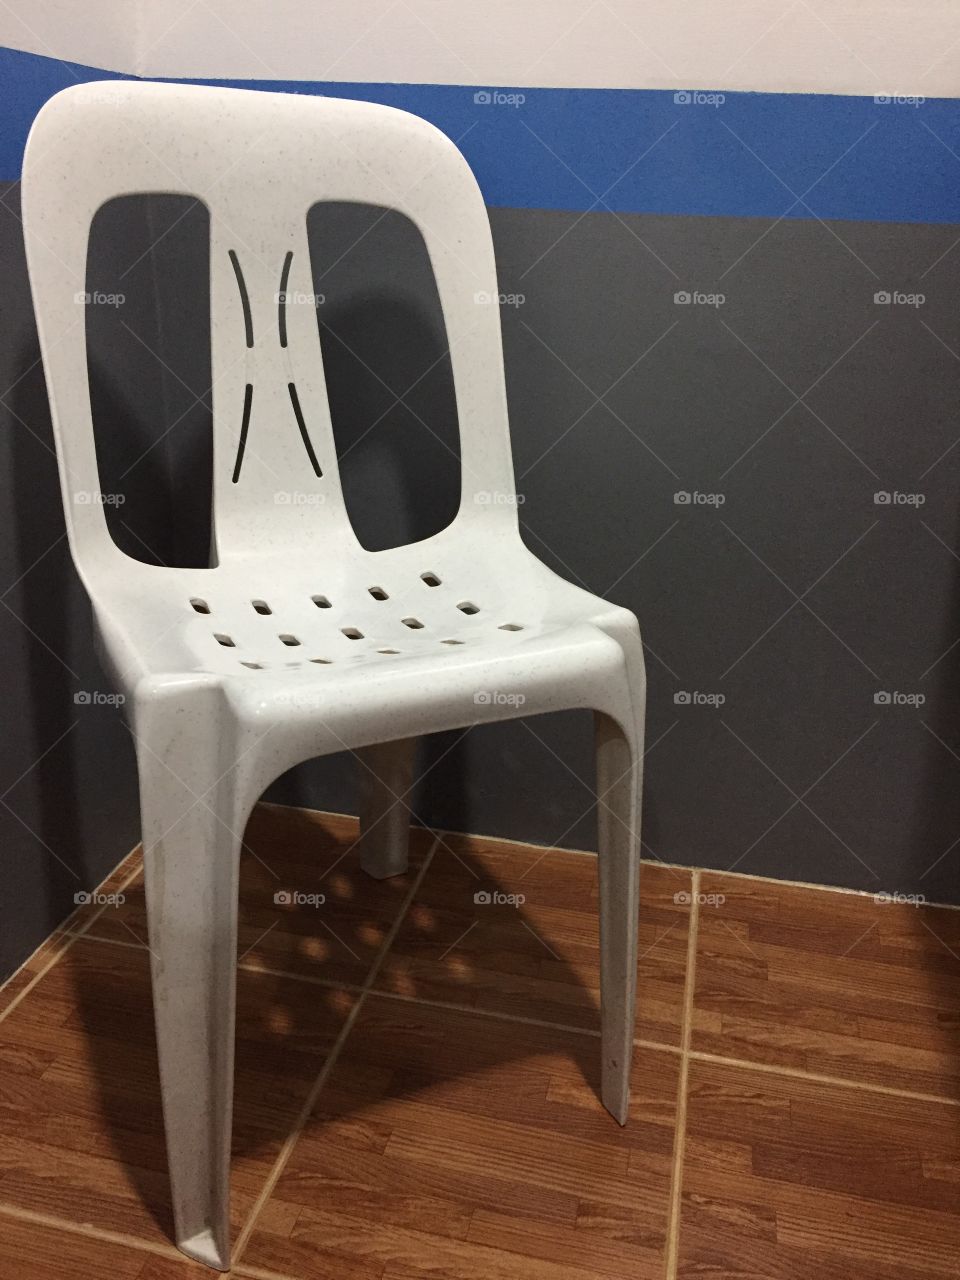 A lonely chair